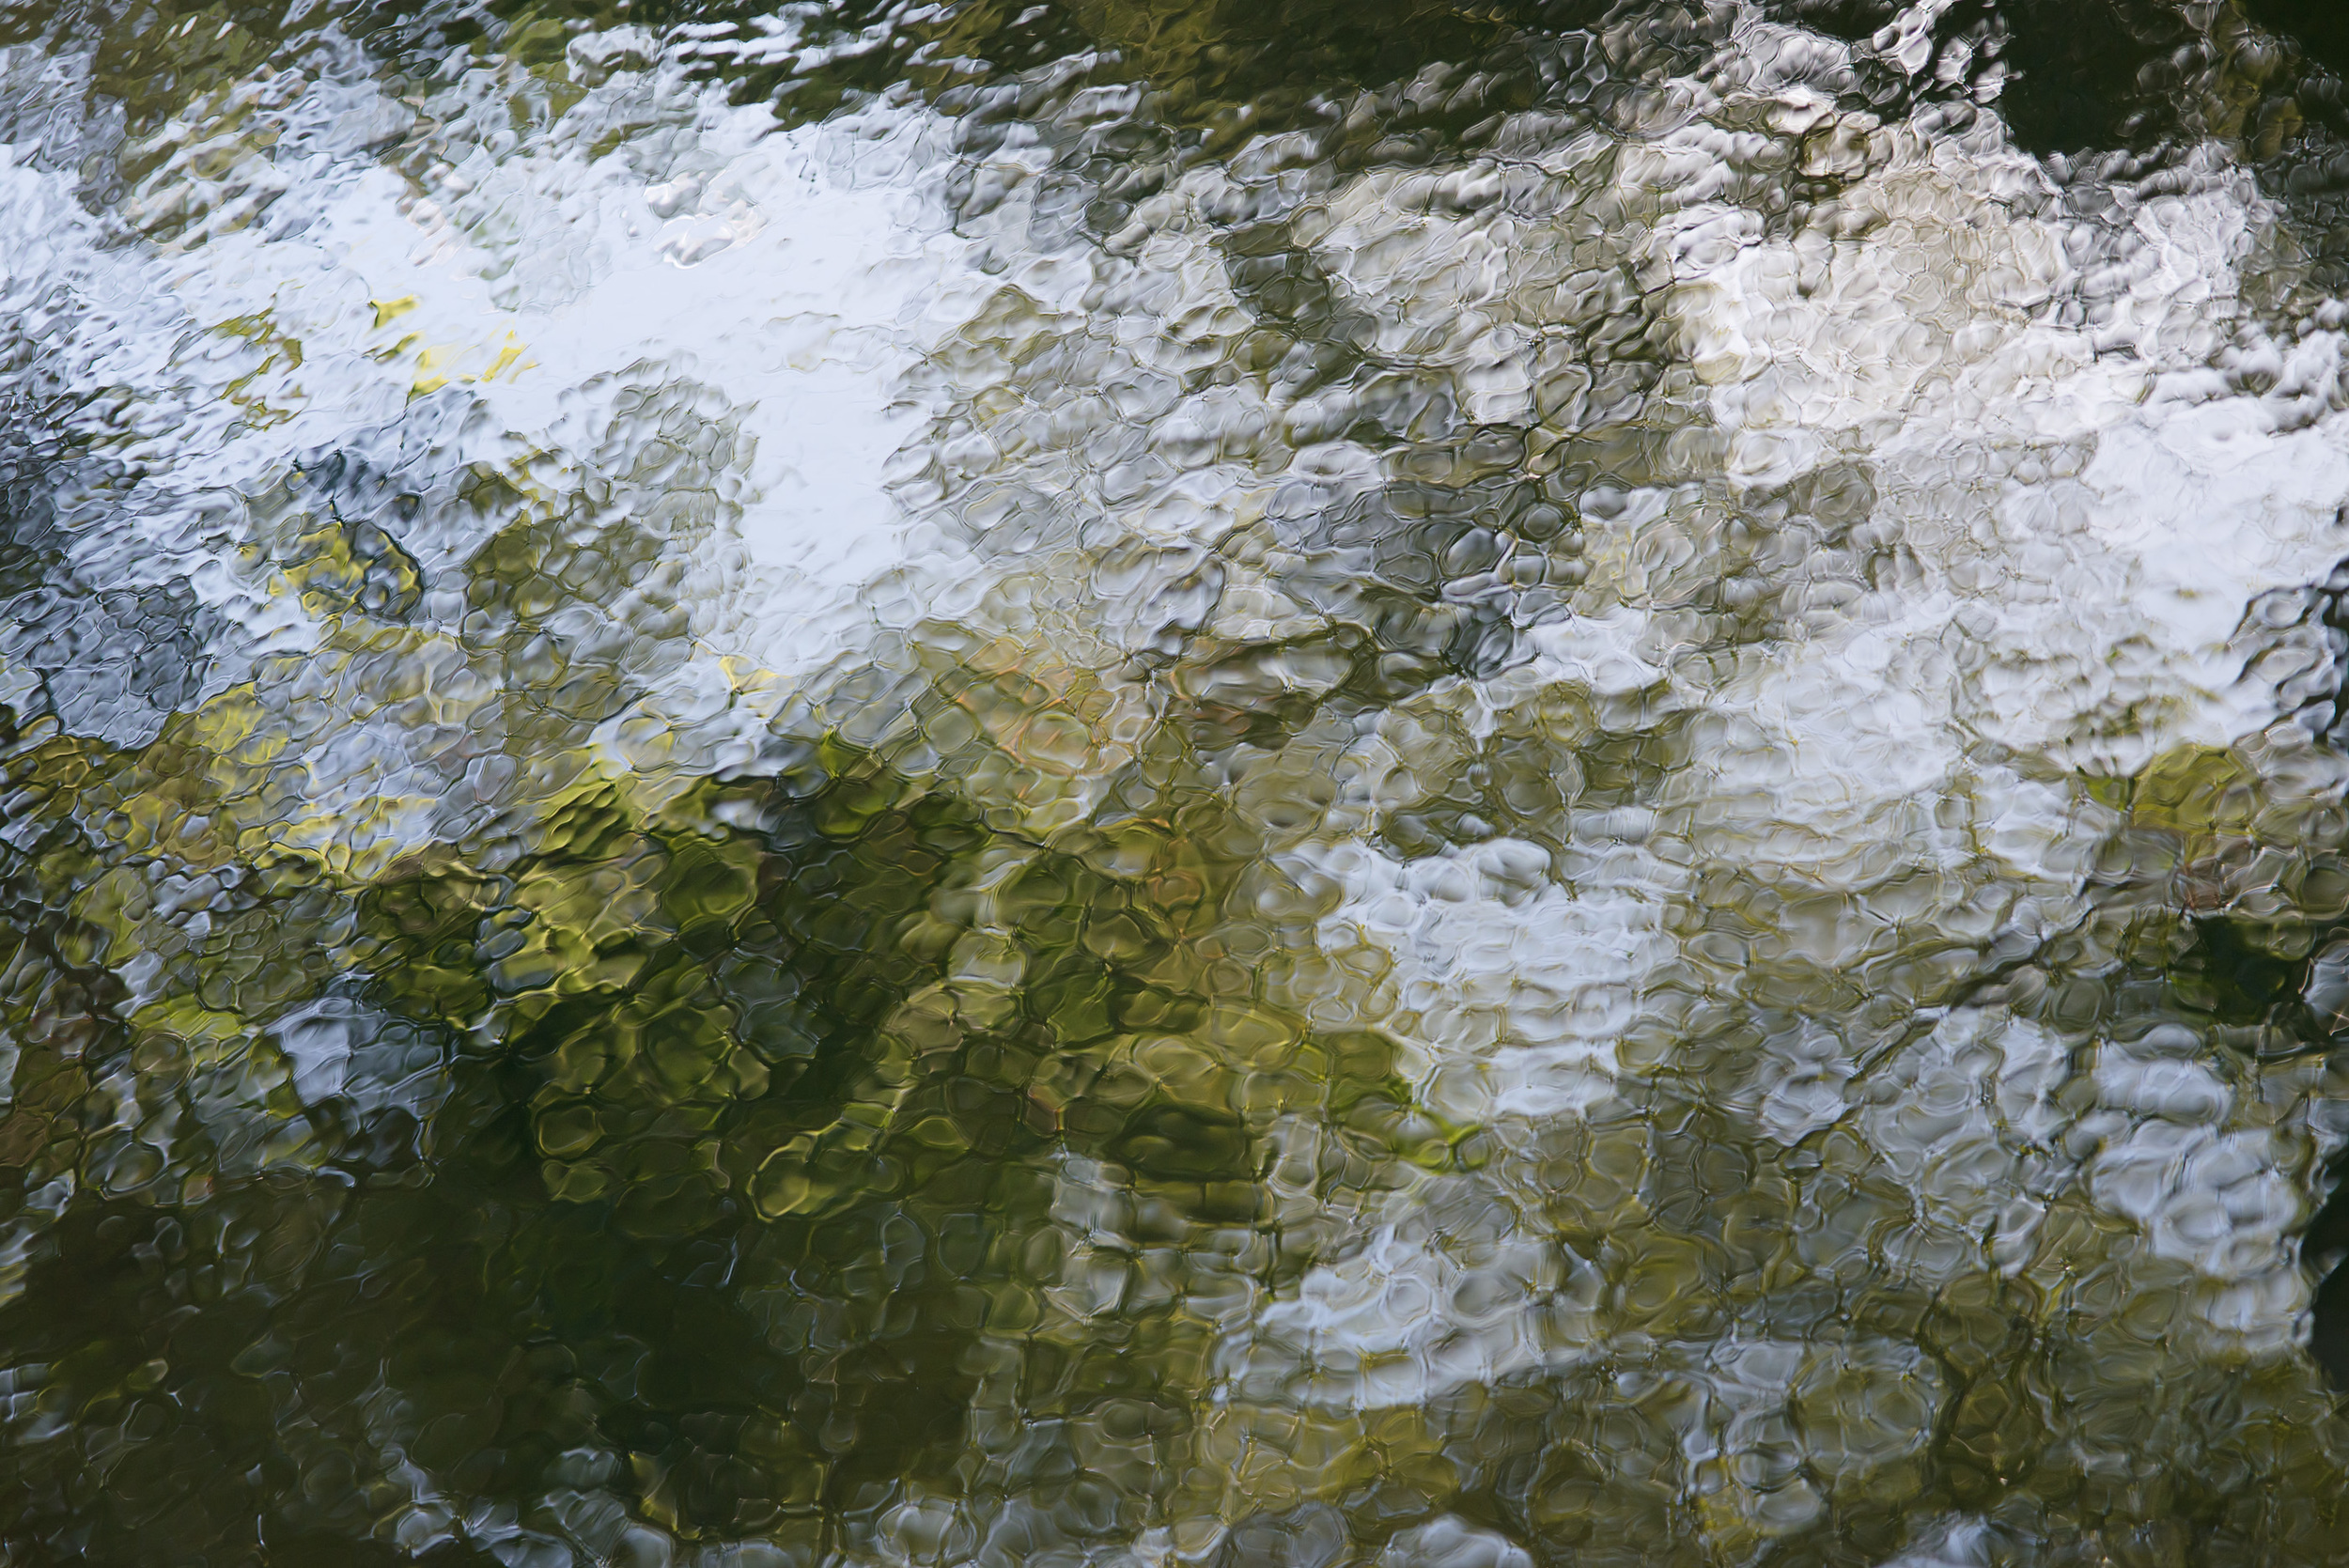   Impromptu Green and White,&nbsp; 2013 Archival Pigment Print 30 x 40 inches 